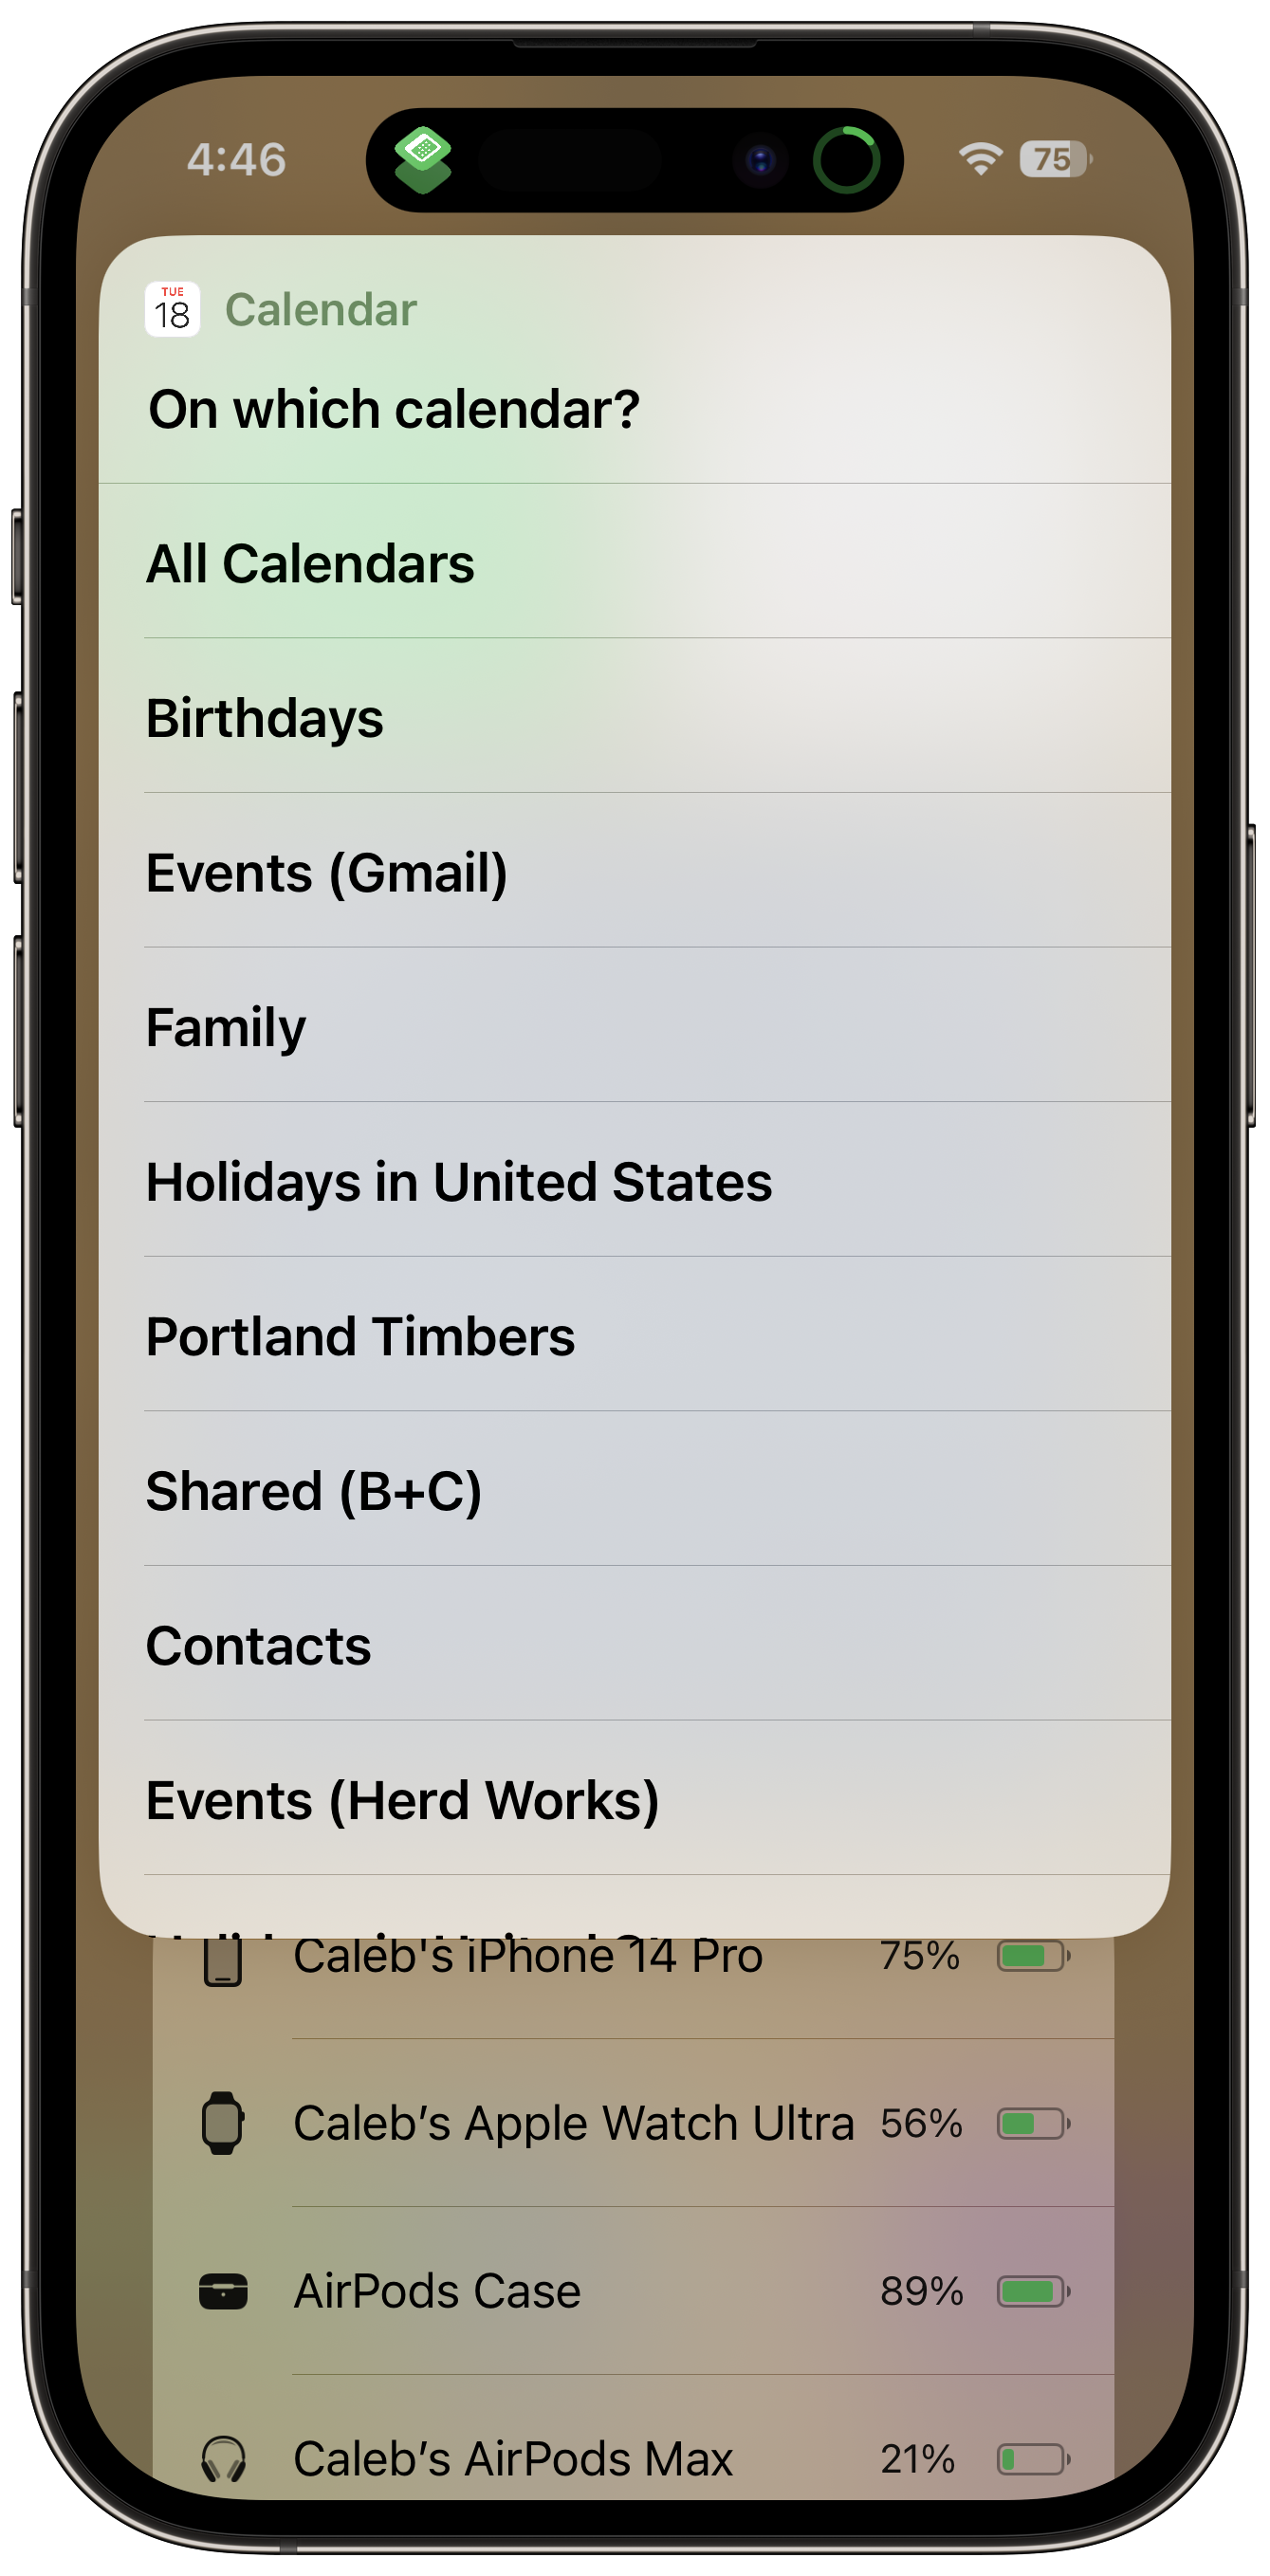 PMD uses the "Get Upcoming Events" action to fetch calendar events.